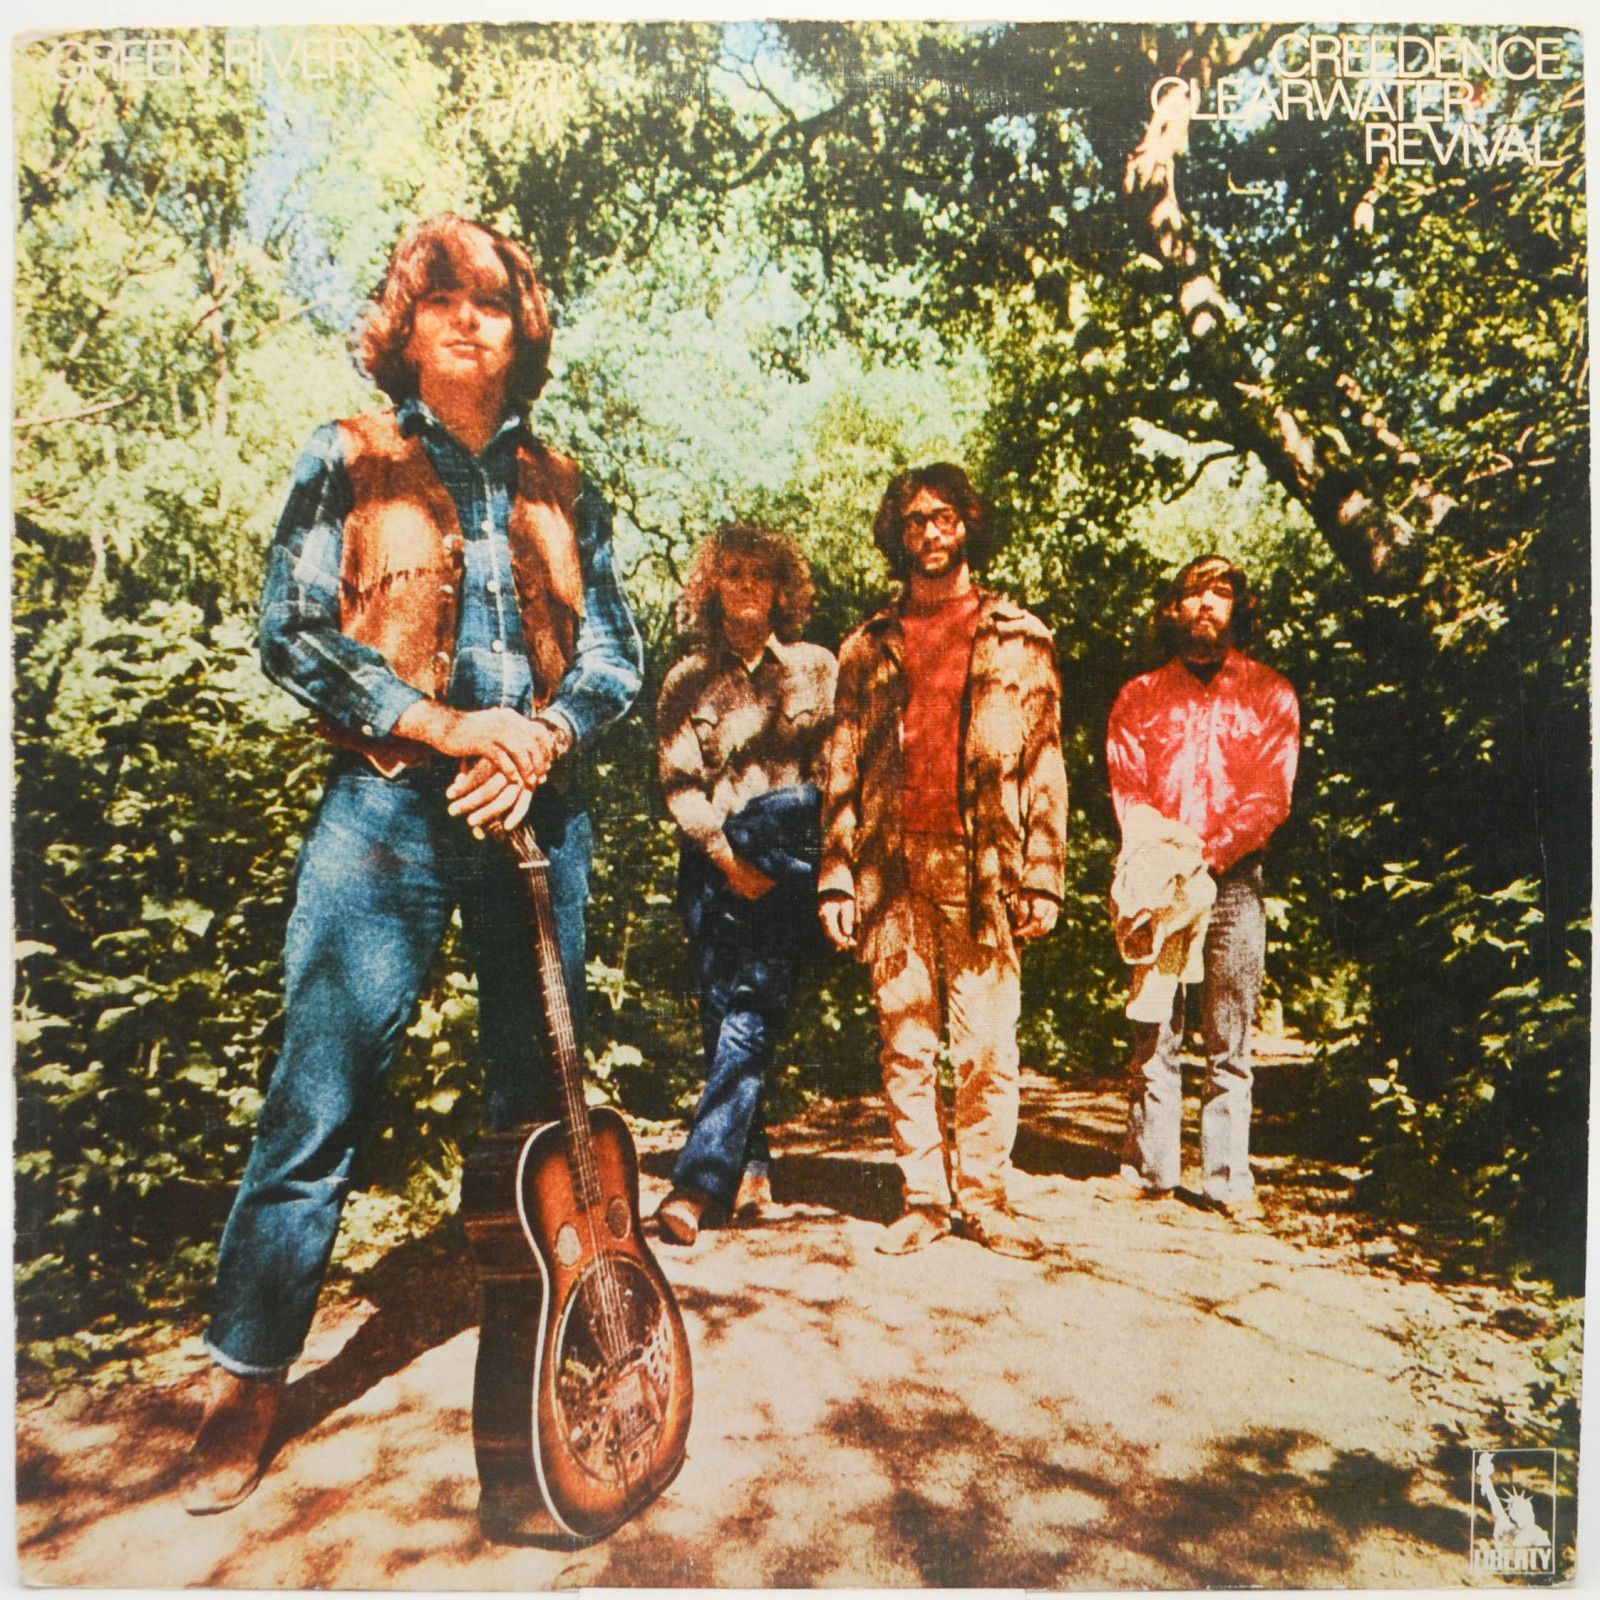 Creedence Clearwater Revival — Green River (UK), 1969